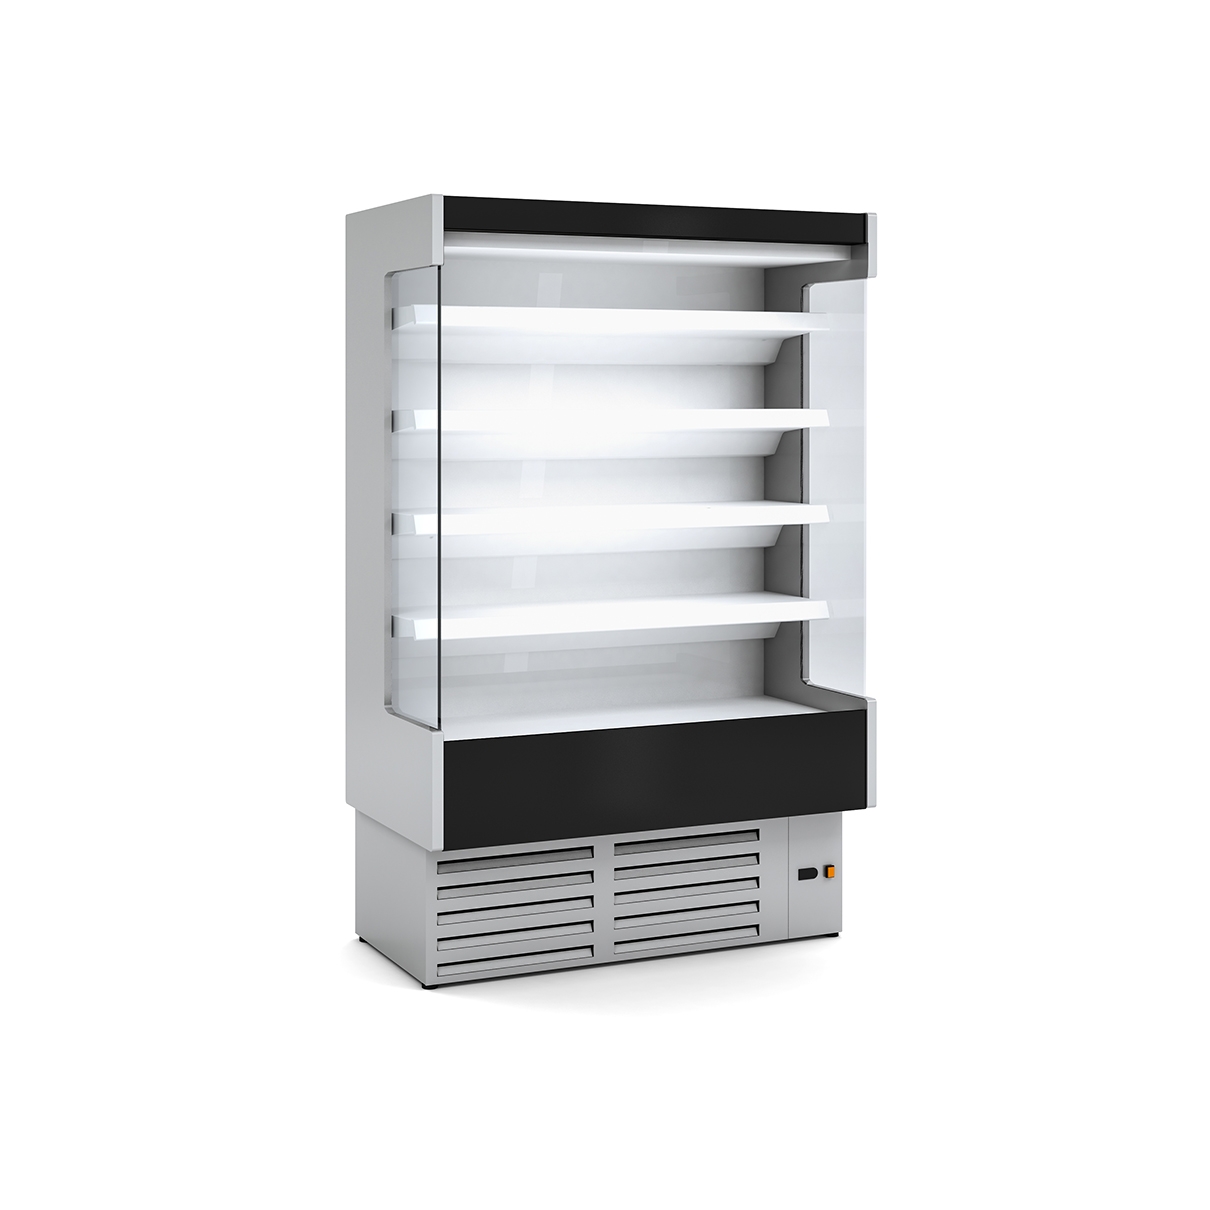 REFRIGERATED WALL CABINET DS1 M1-M2